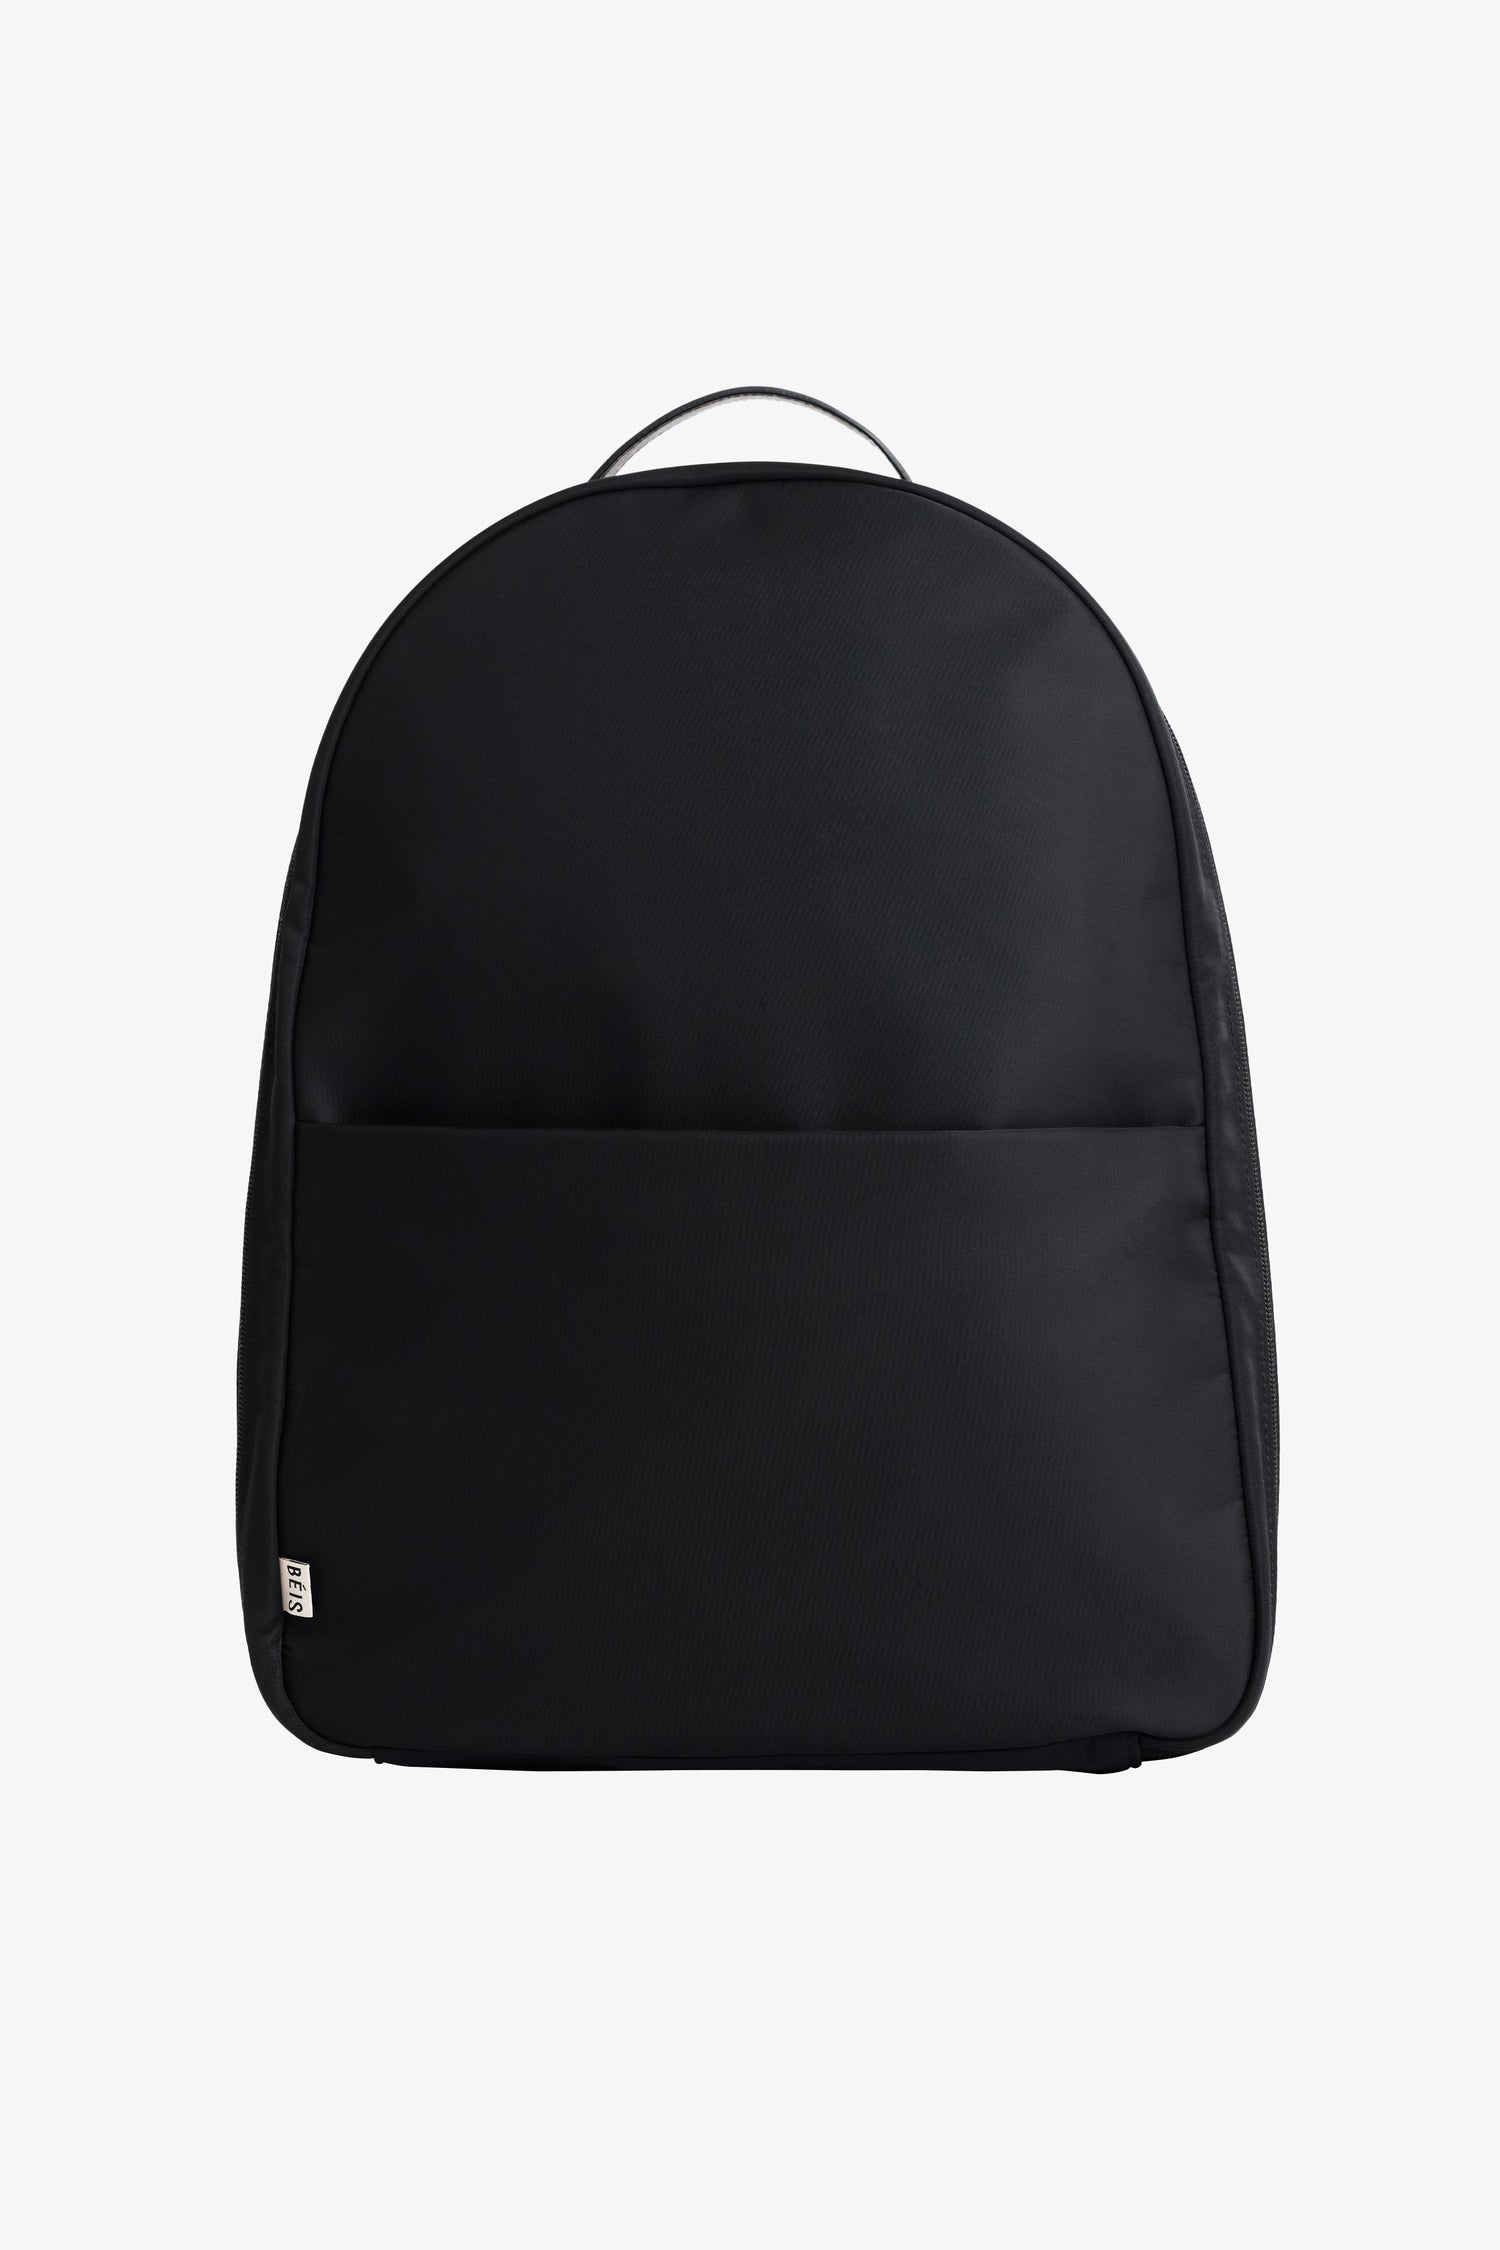 The Commuter Backpack Colors